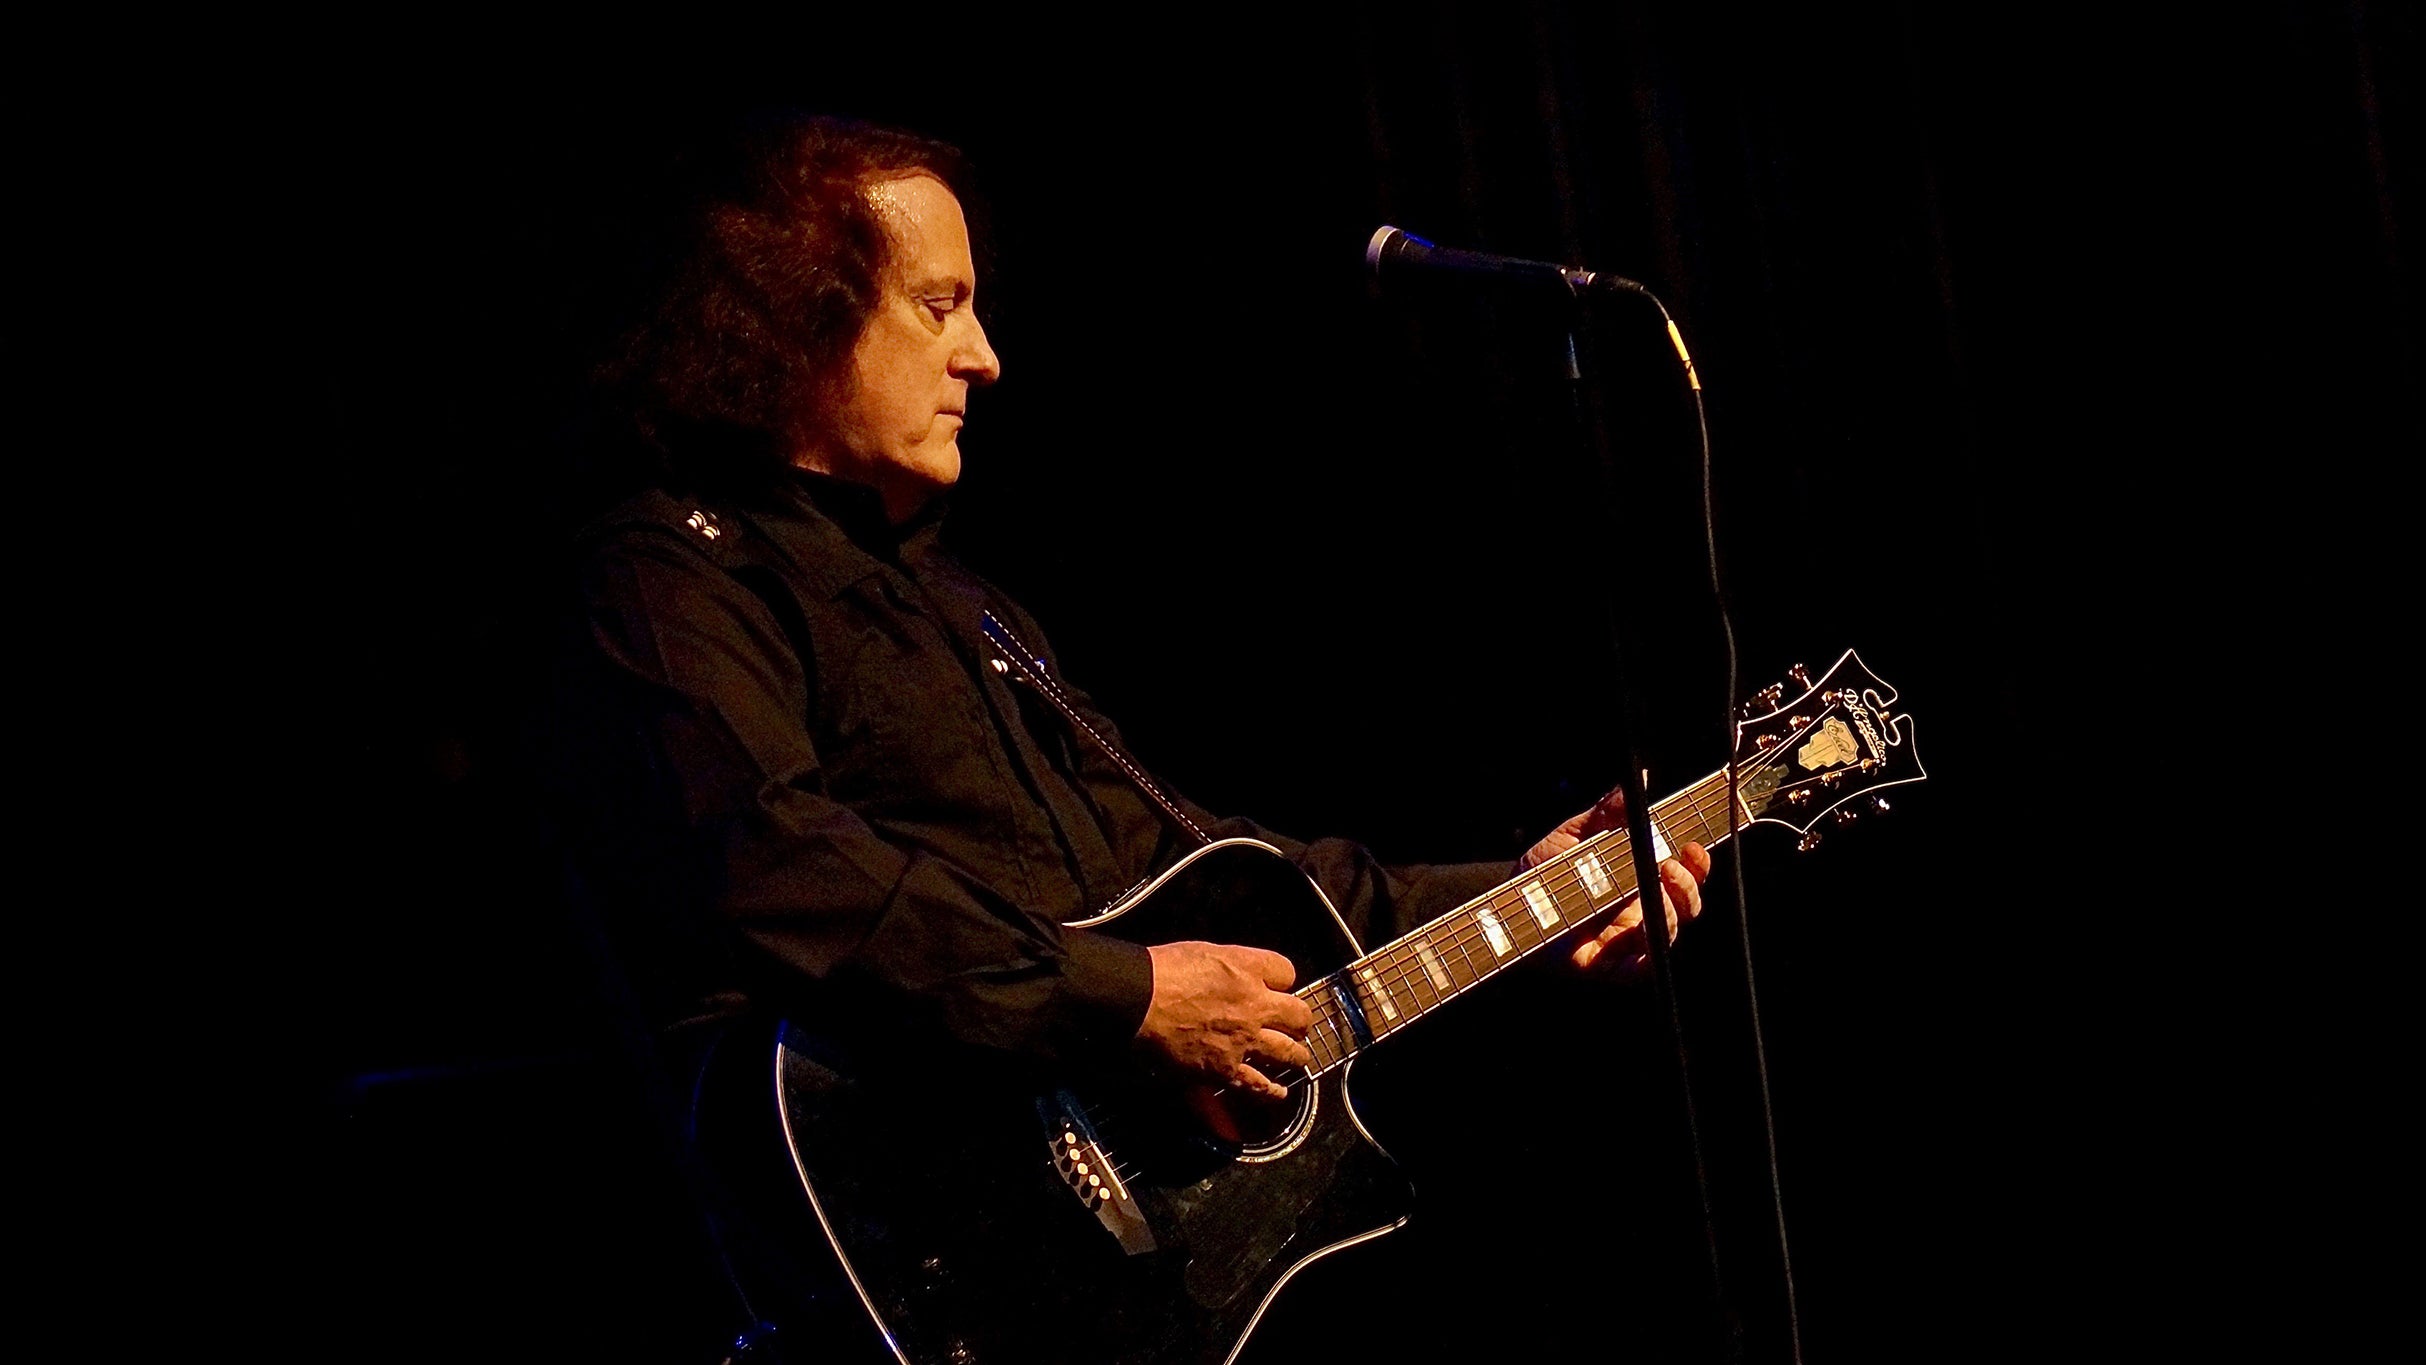 Tommy James and the Shondells and The Grass Roots in Westbury promo photo for Citi® Cardmember Preferred presale offer code